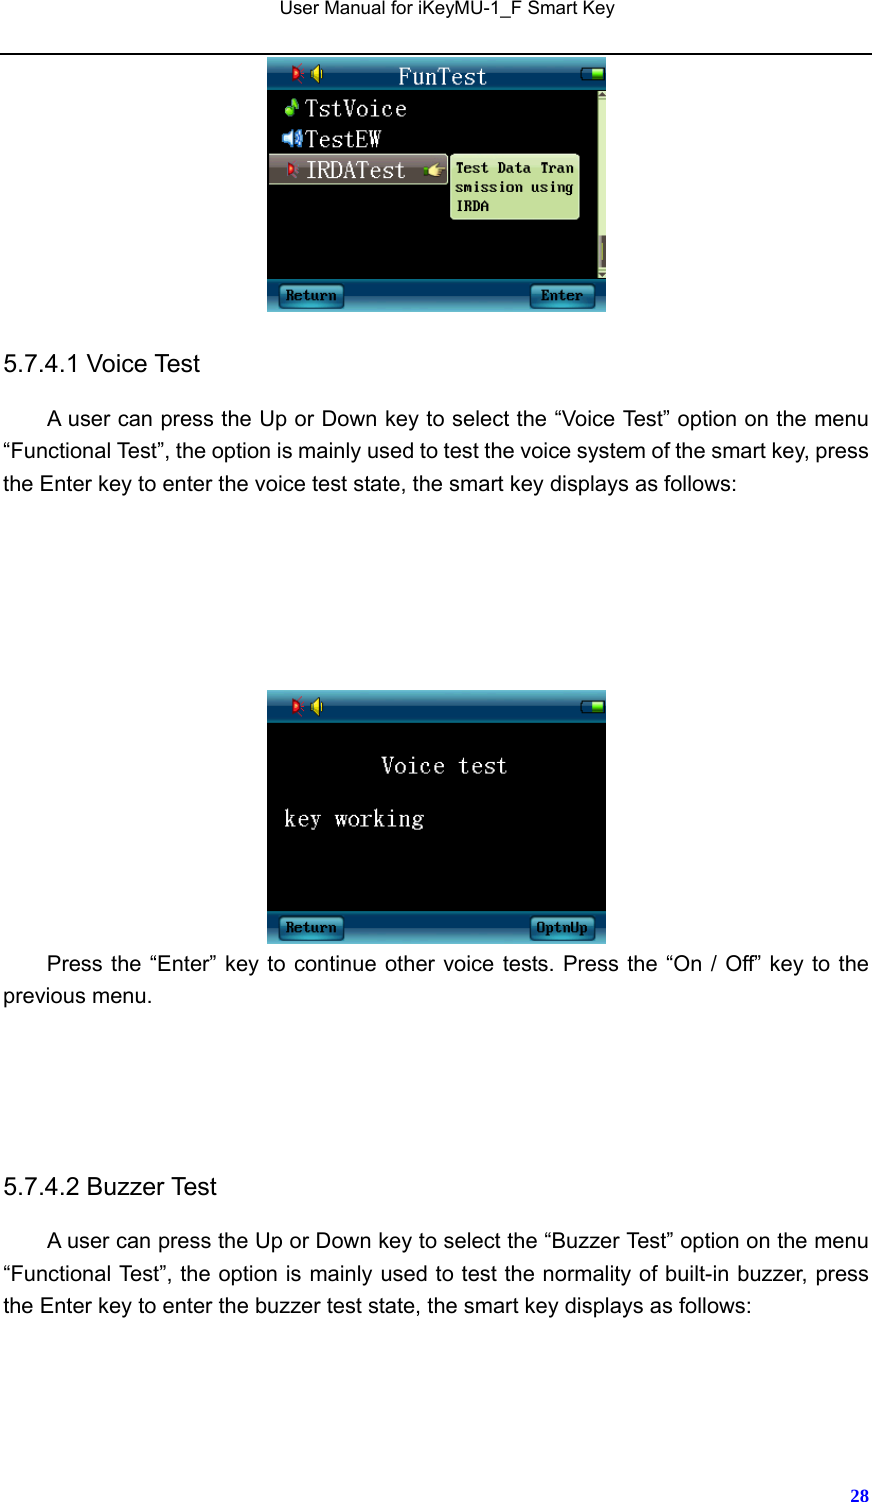   User Manual for iKeyMU-1_F Smart Key       28 5.7.4.1 Voice Test A user can press the Up or Down key to select the “Voice Test” option on the menu “Functional Test”, the option is mainly used to test the voice system of the smart key, press the Enter key to enter the voice test state, the smart key displays as follows:       Press the “Enter” key to continue other voice tests. Press the “On / Off” key to the previous menu.    5.7.4.2 Buzzer Test A user can press the Up or Down key to select the “Buzzer Test” option on the menu “Functional Test”, the option is mainly used to test the normality of built-in buzzer, press the Enter key to enter the buzzer test state, the smart key displays as follows:   